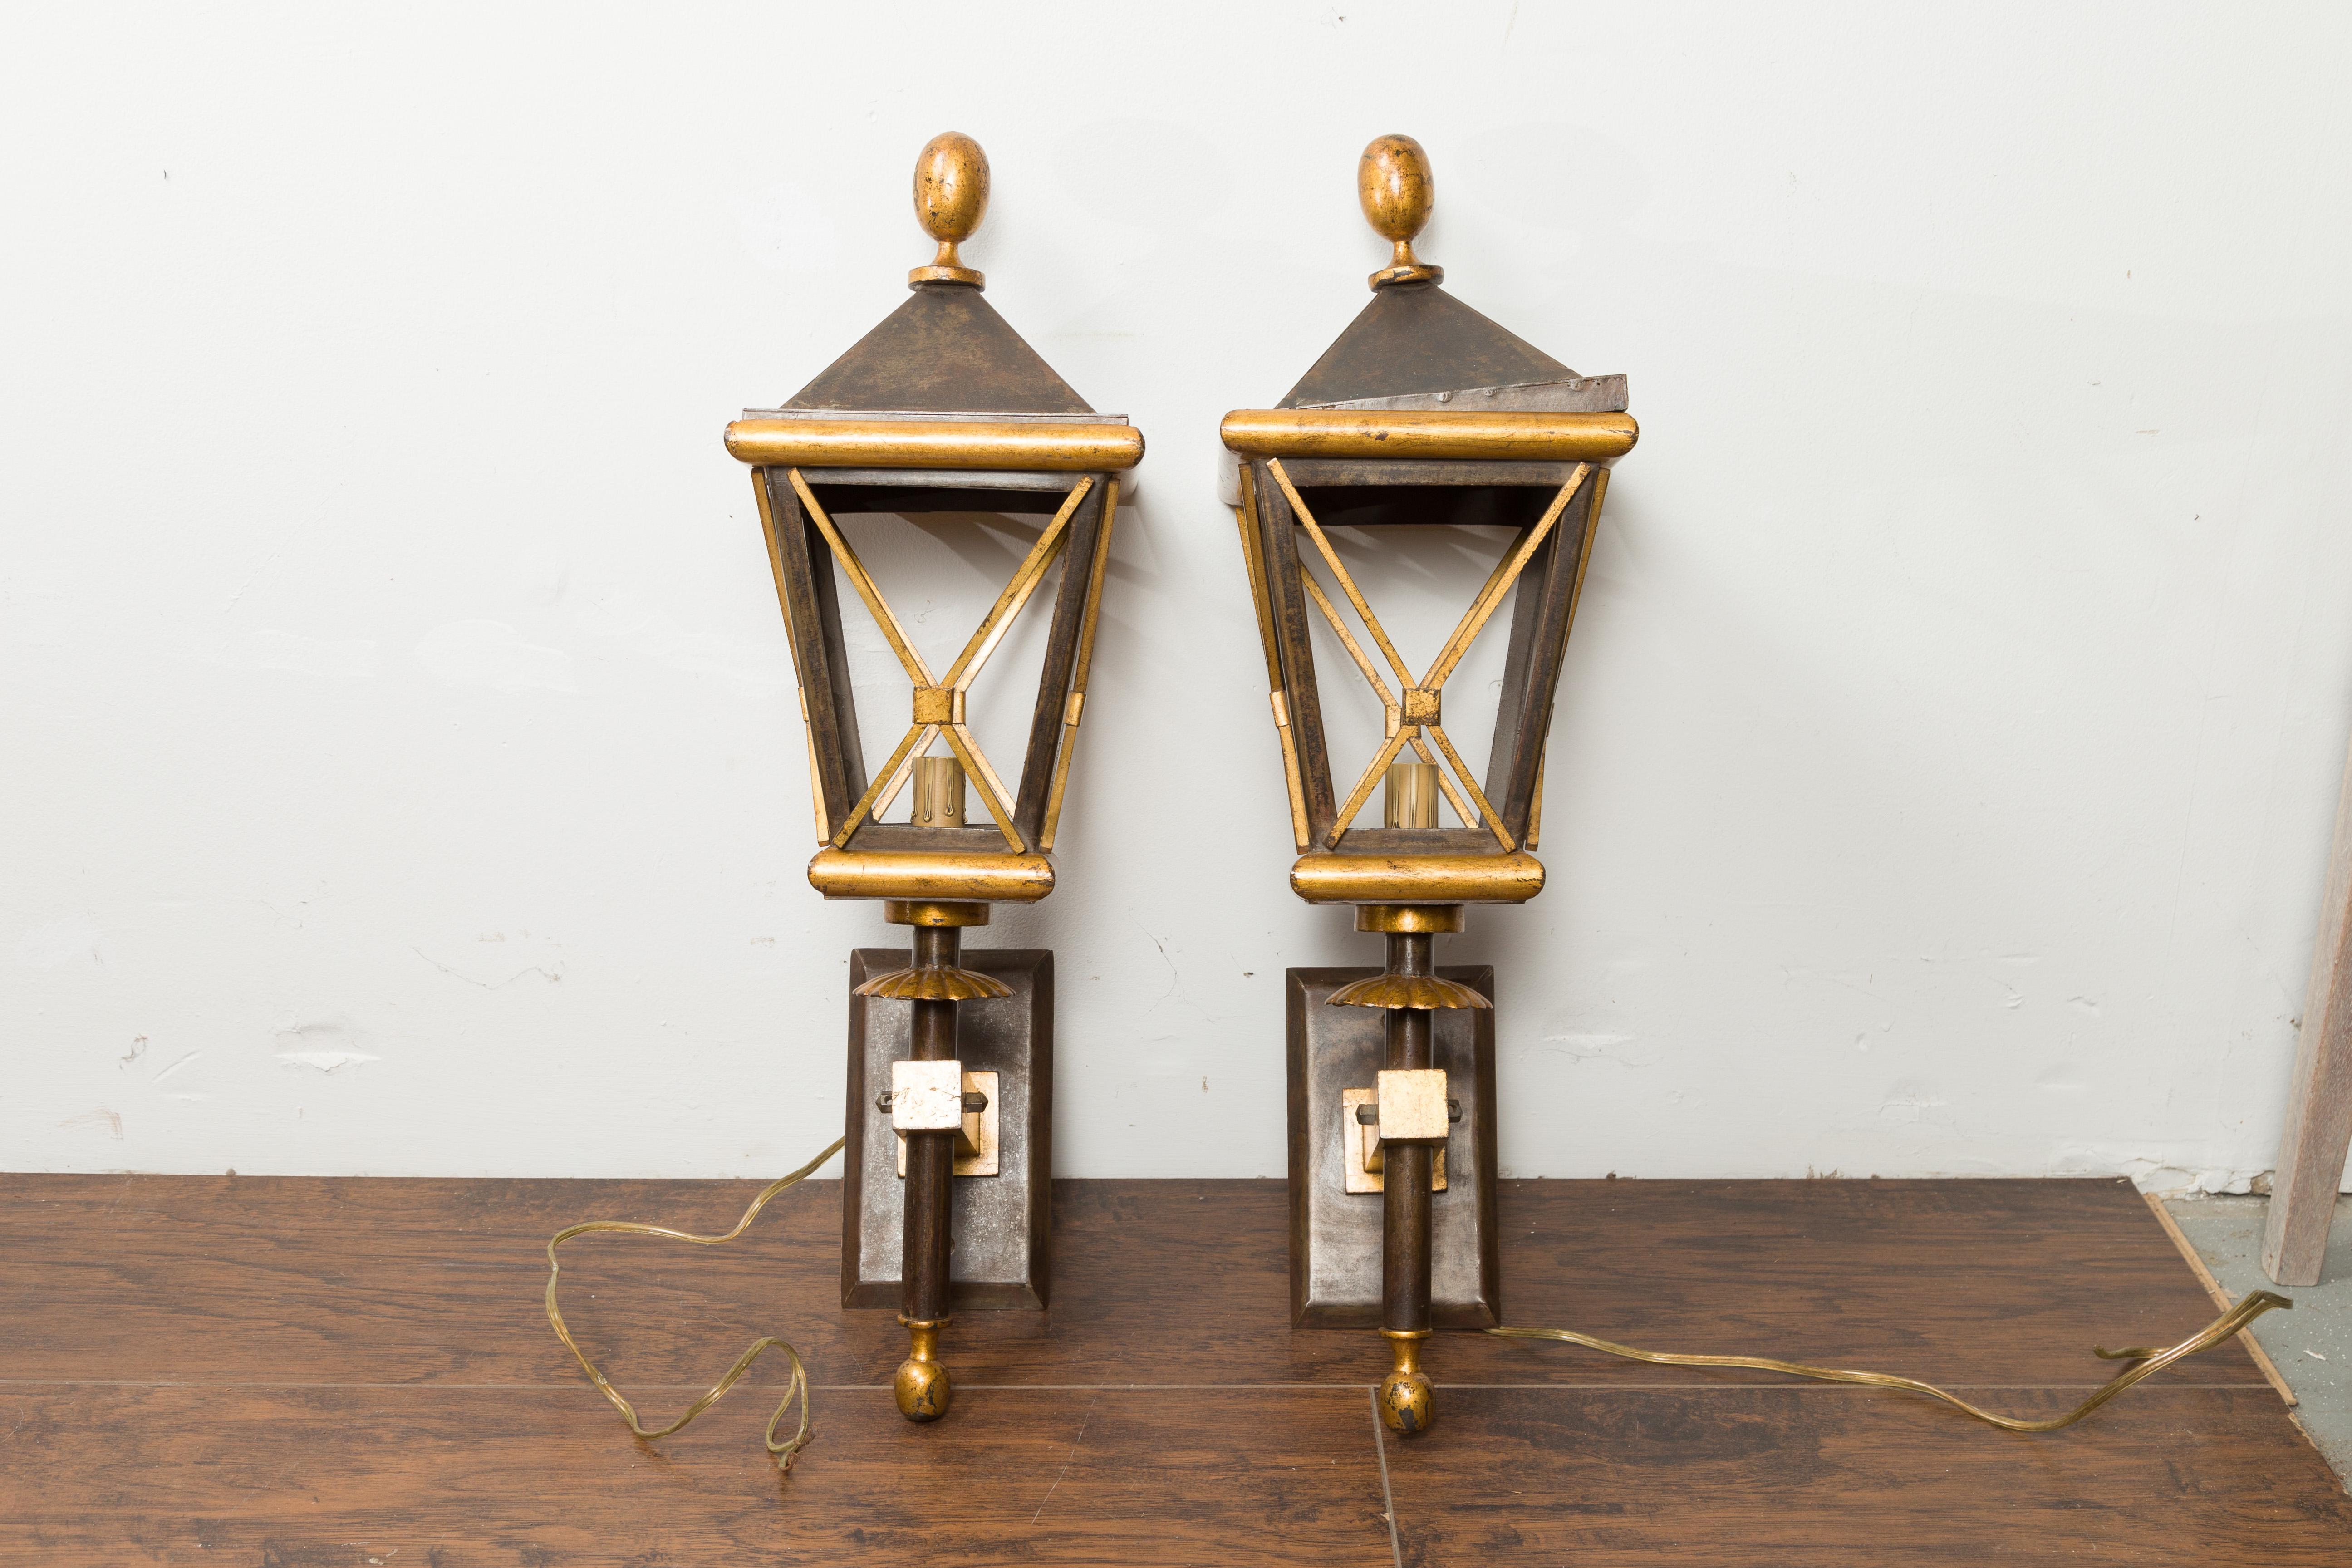 A pair of French gilt iron wall mounted lanterns from the mid 20th century, with single lights and acorn style finials. Created in France during the midcentury period, each of this pair of lanterns features a rectangular backplate connected to a